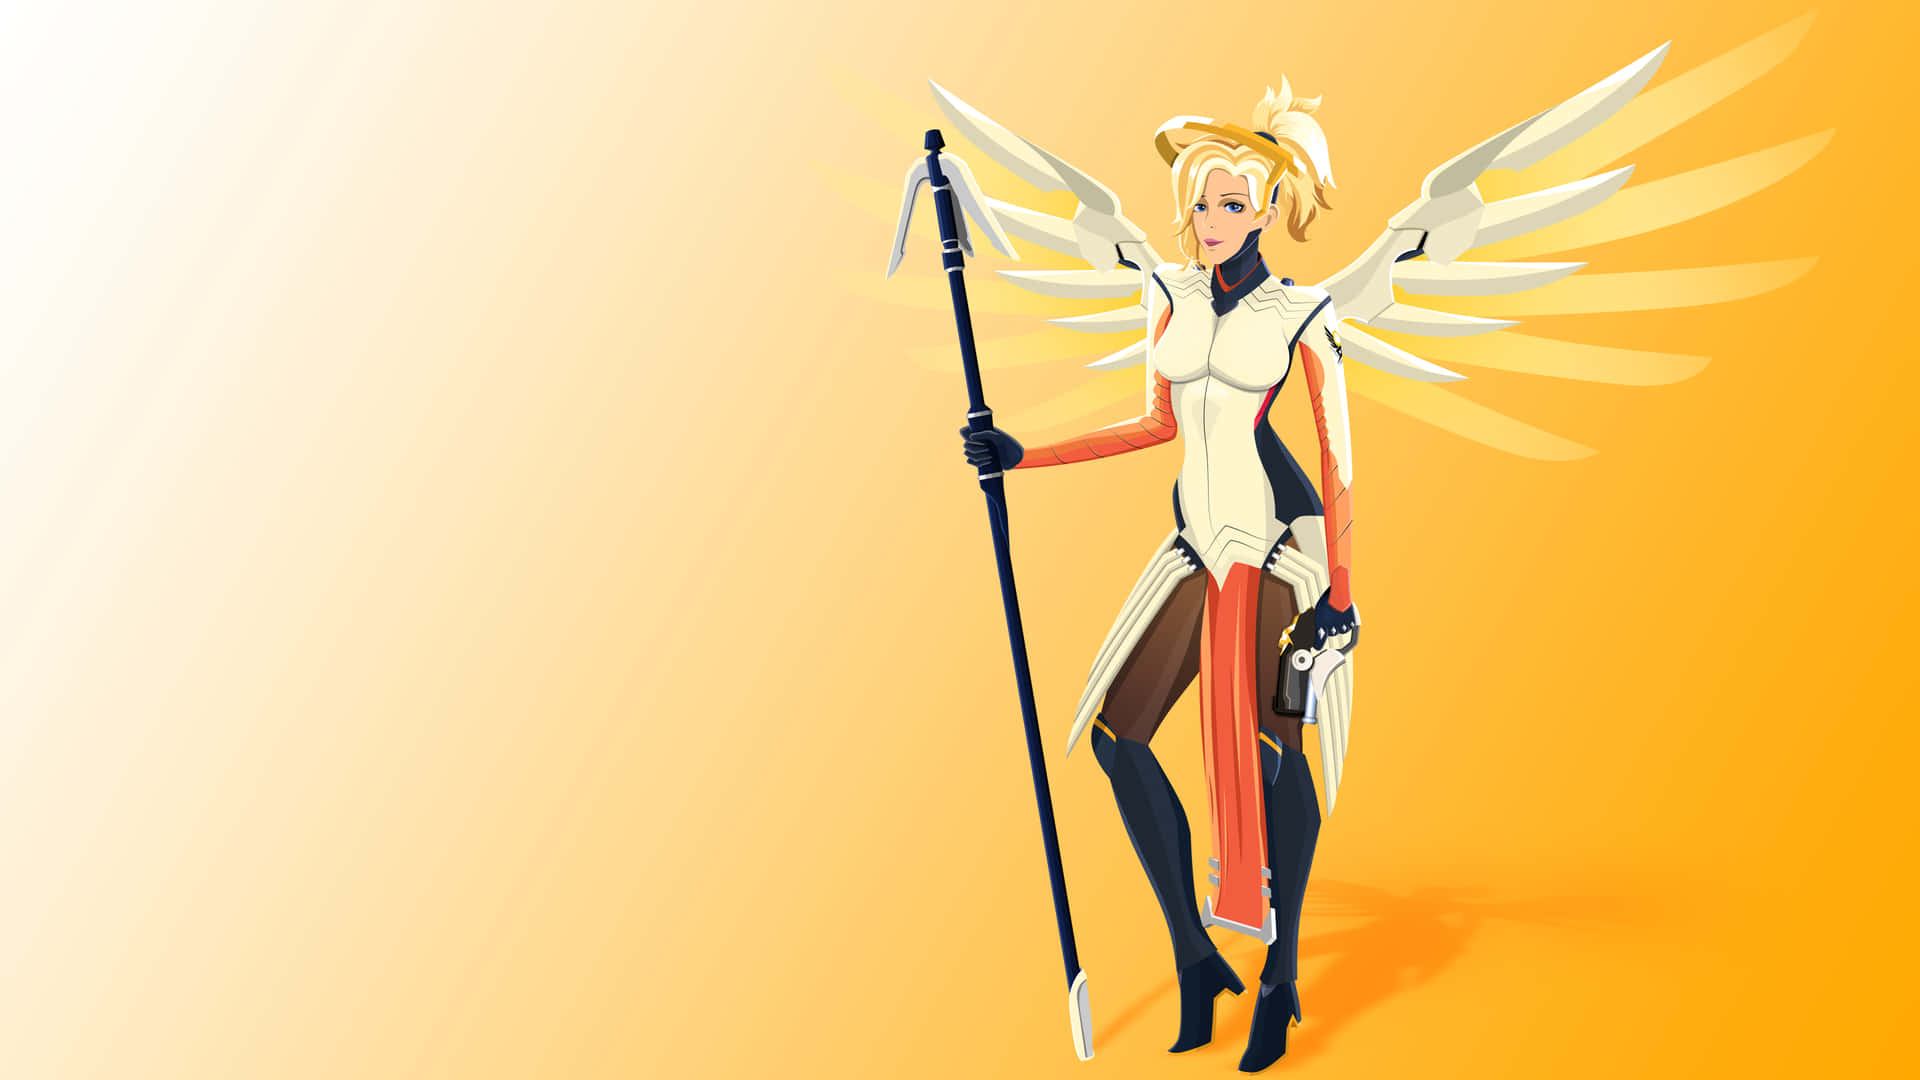 Overwatch Mercy In Action On The Battlefield Background